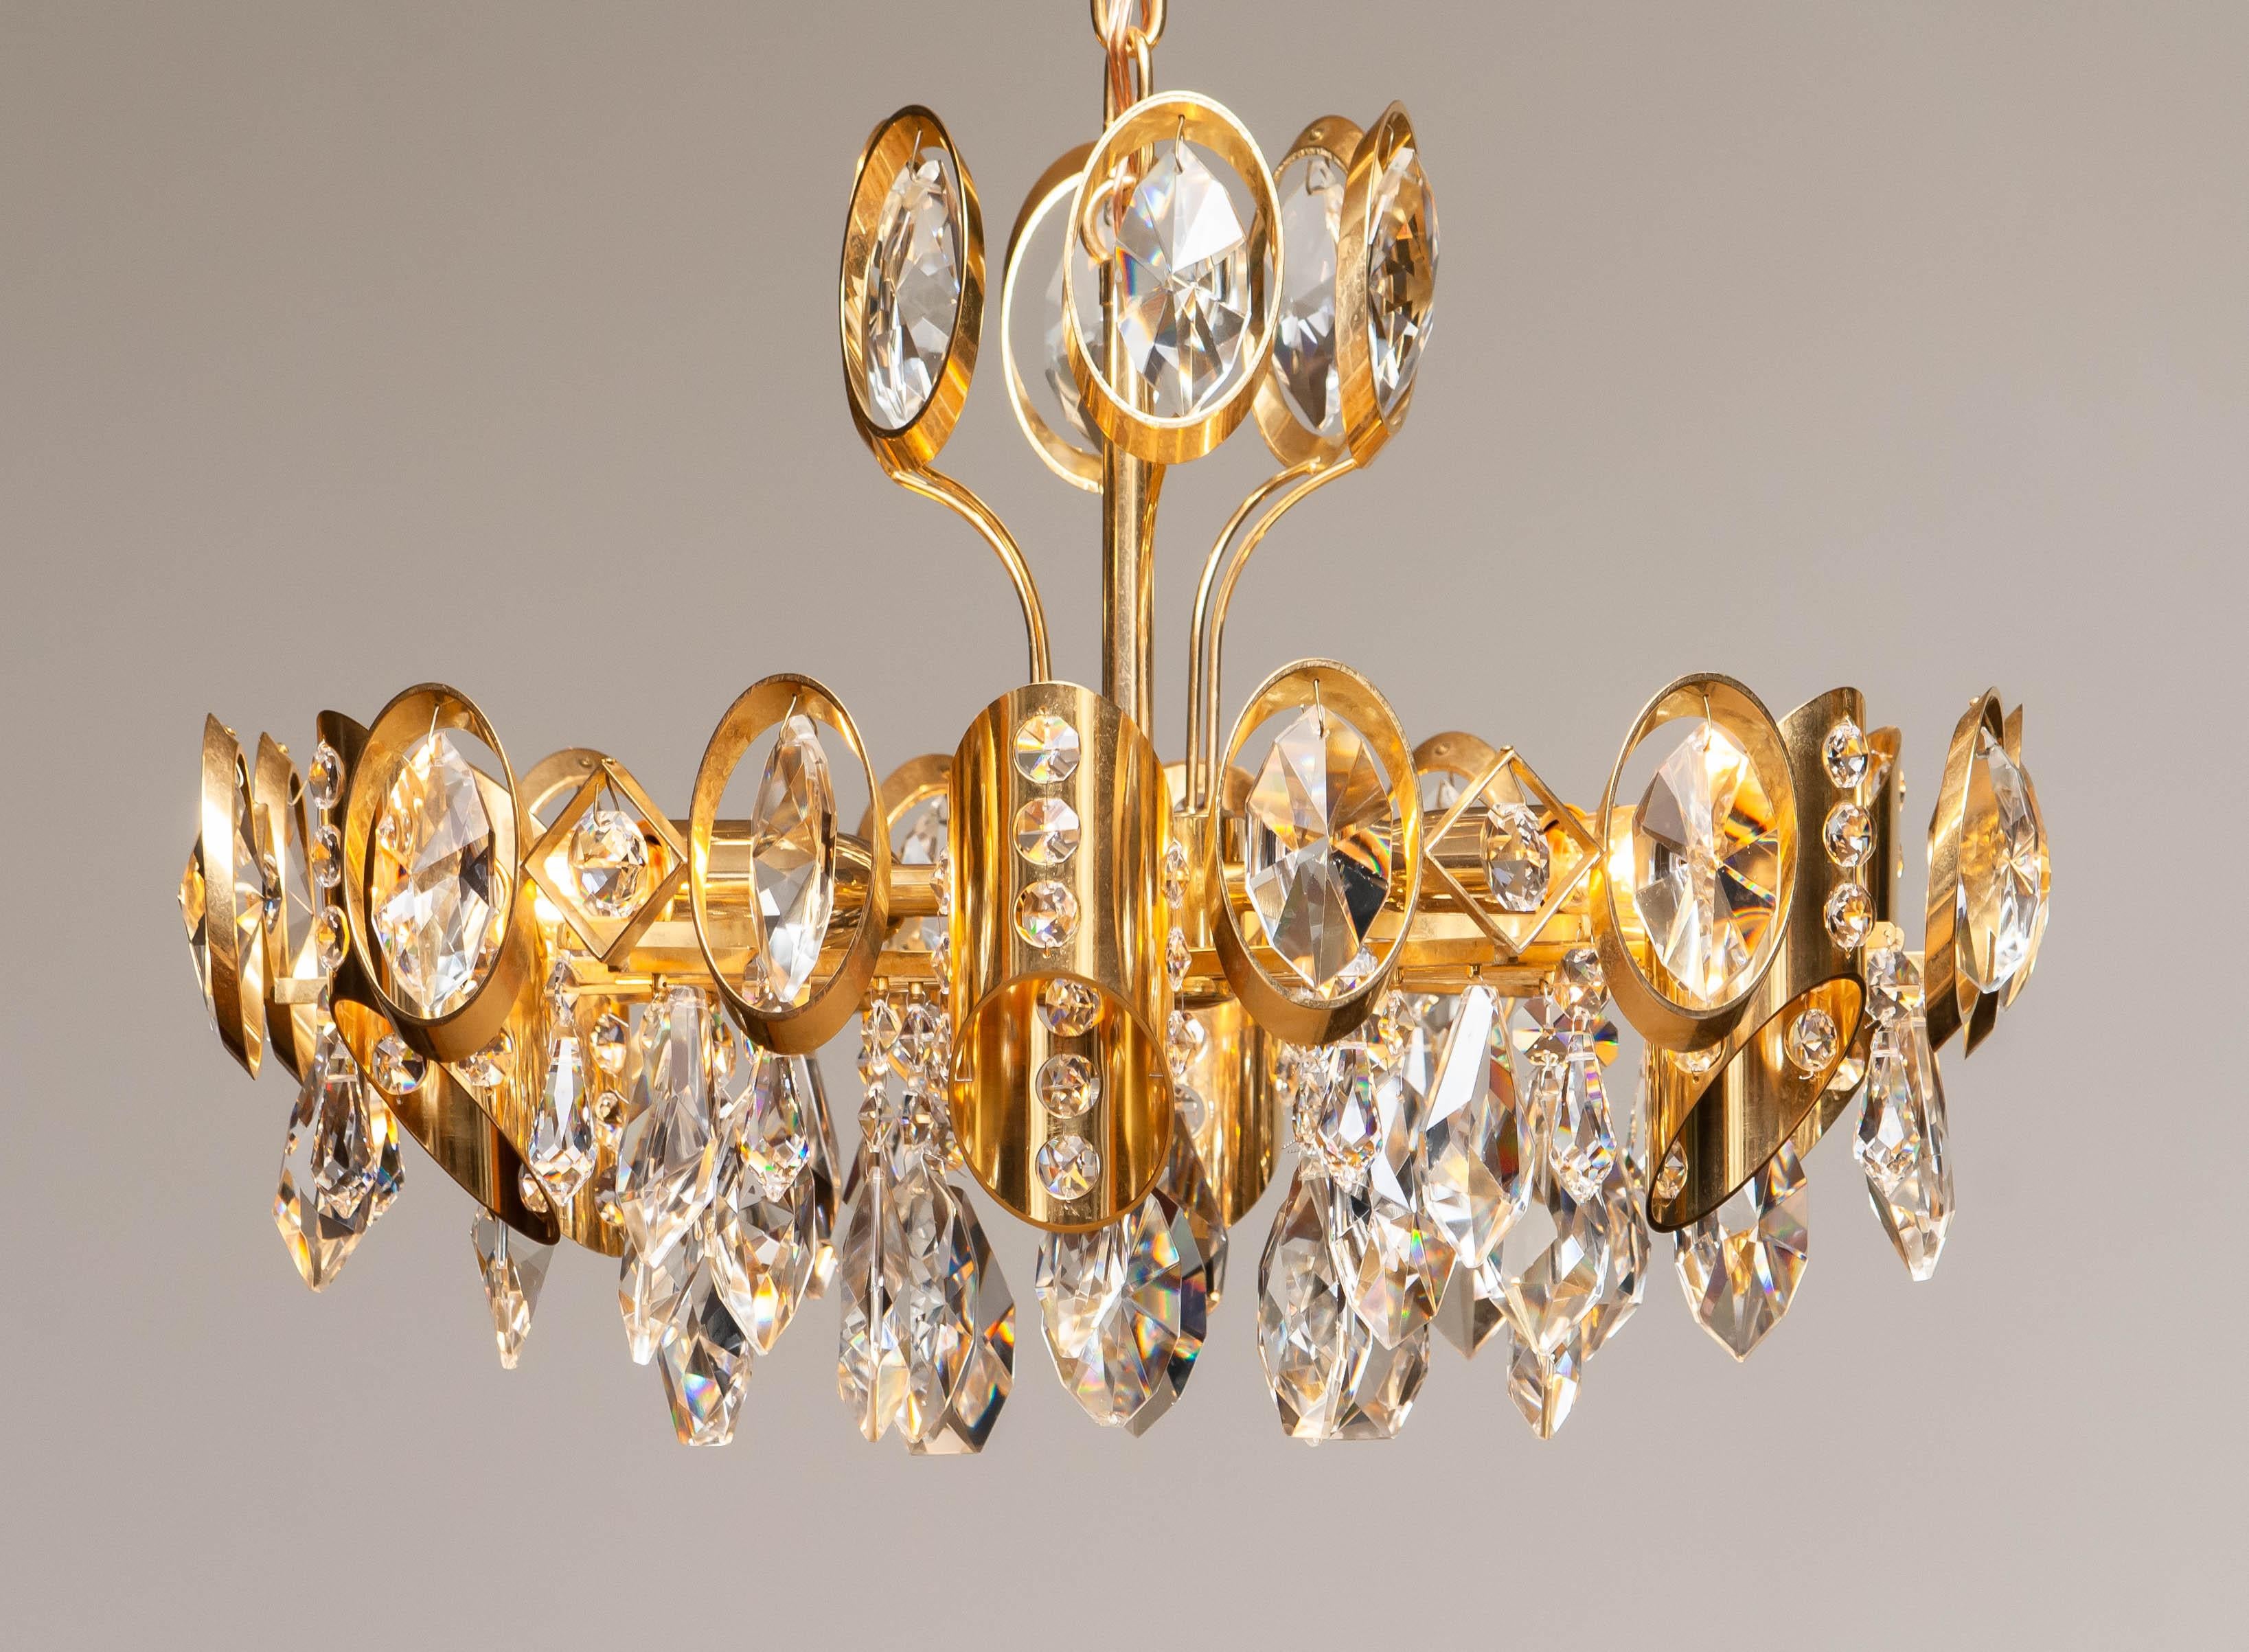 1960's Gilt Brass Filled with Large Faceted Crystals Chandelier by Ernest Palme In Good Condition For Sale In Silvolde, Gelderland